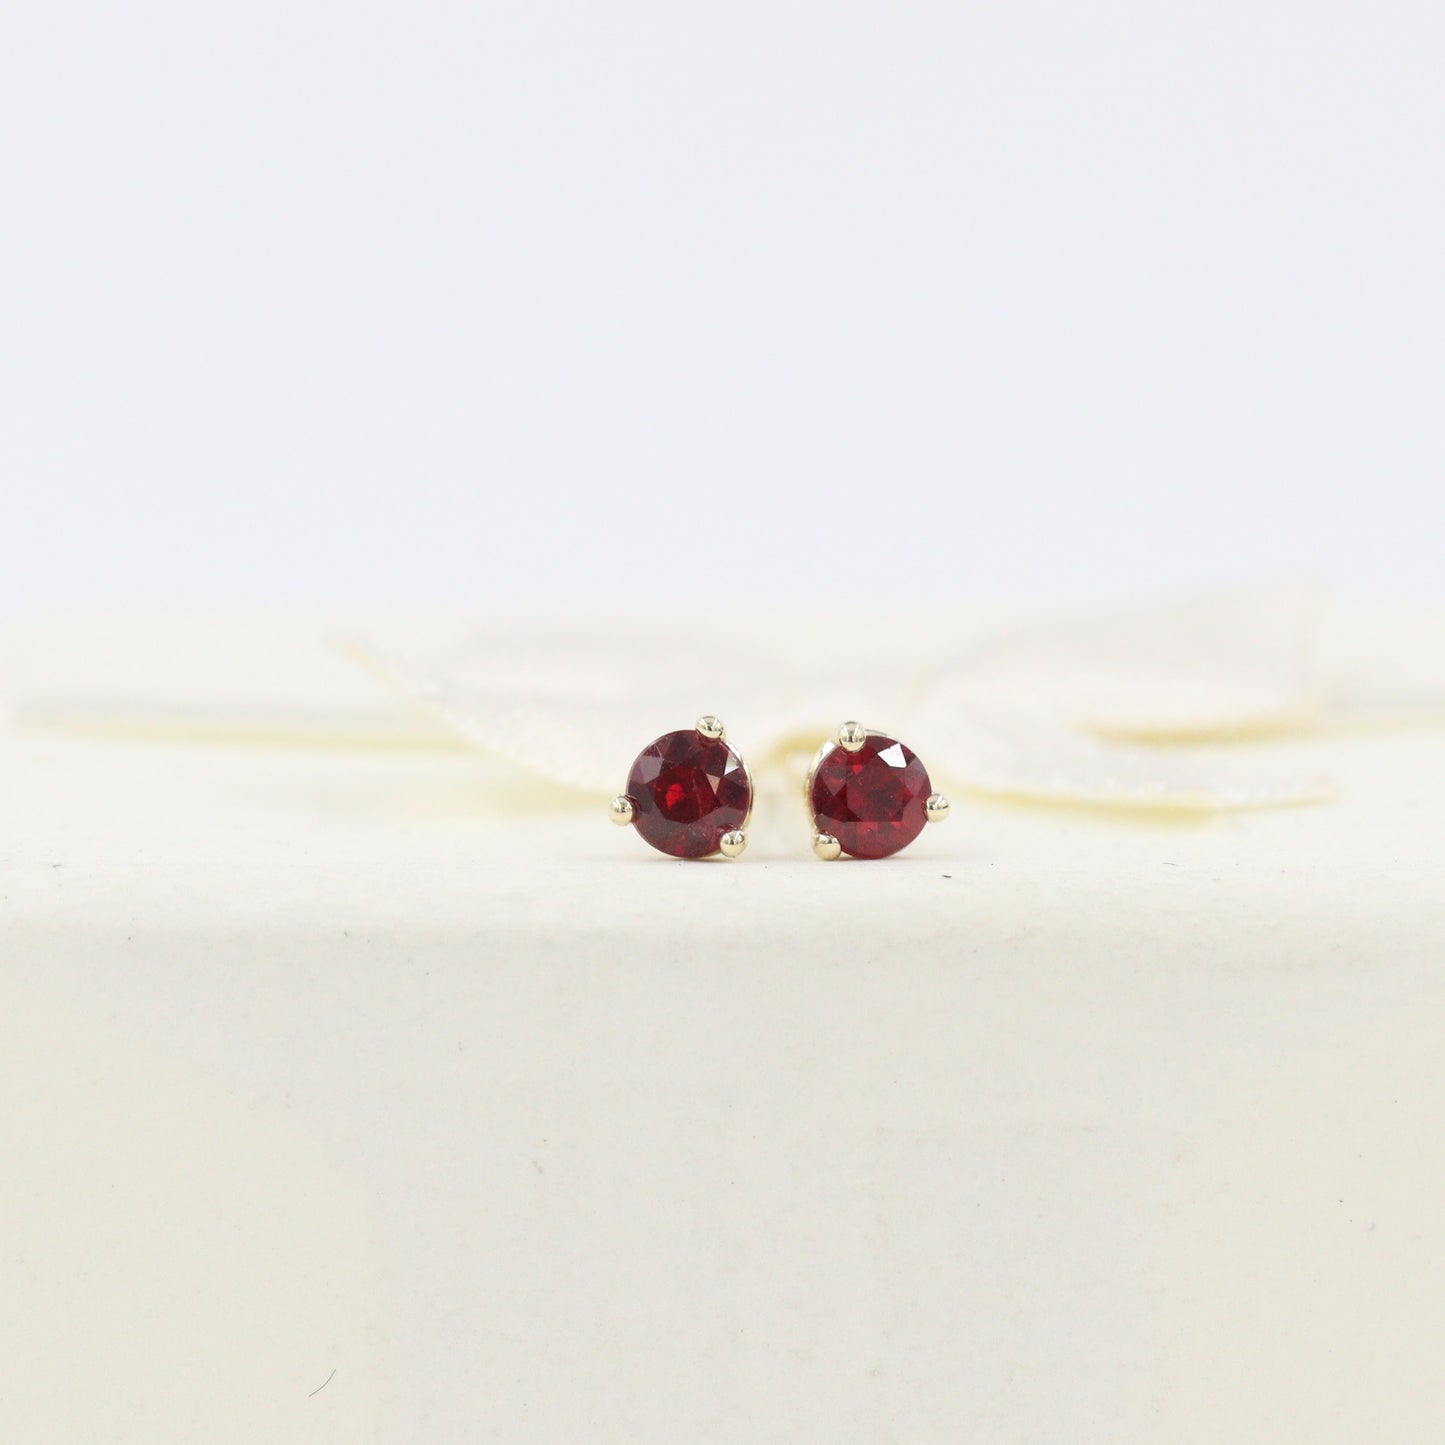 Natural Ruby Stud Earrings/Three Prong Set Round Ruby 0.1ct Stud Earrings/Single or Pair Ruby Stud Earrings/Gifts for her/Anniversary gift